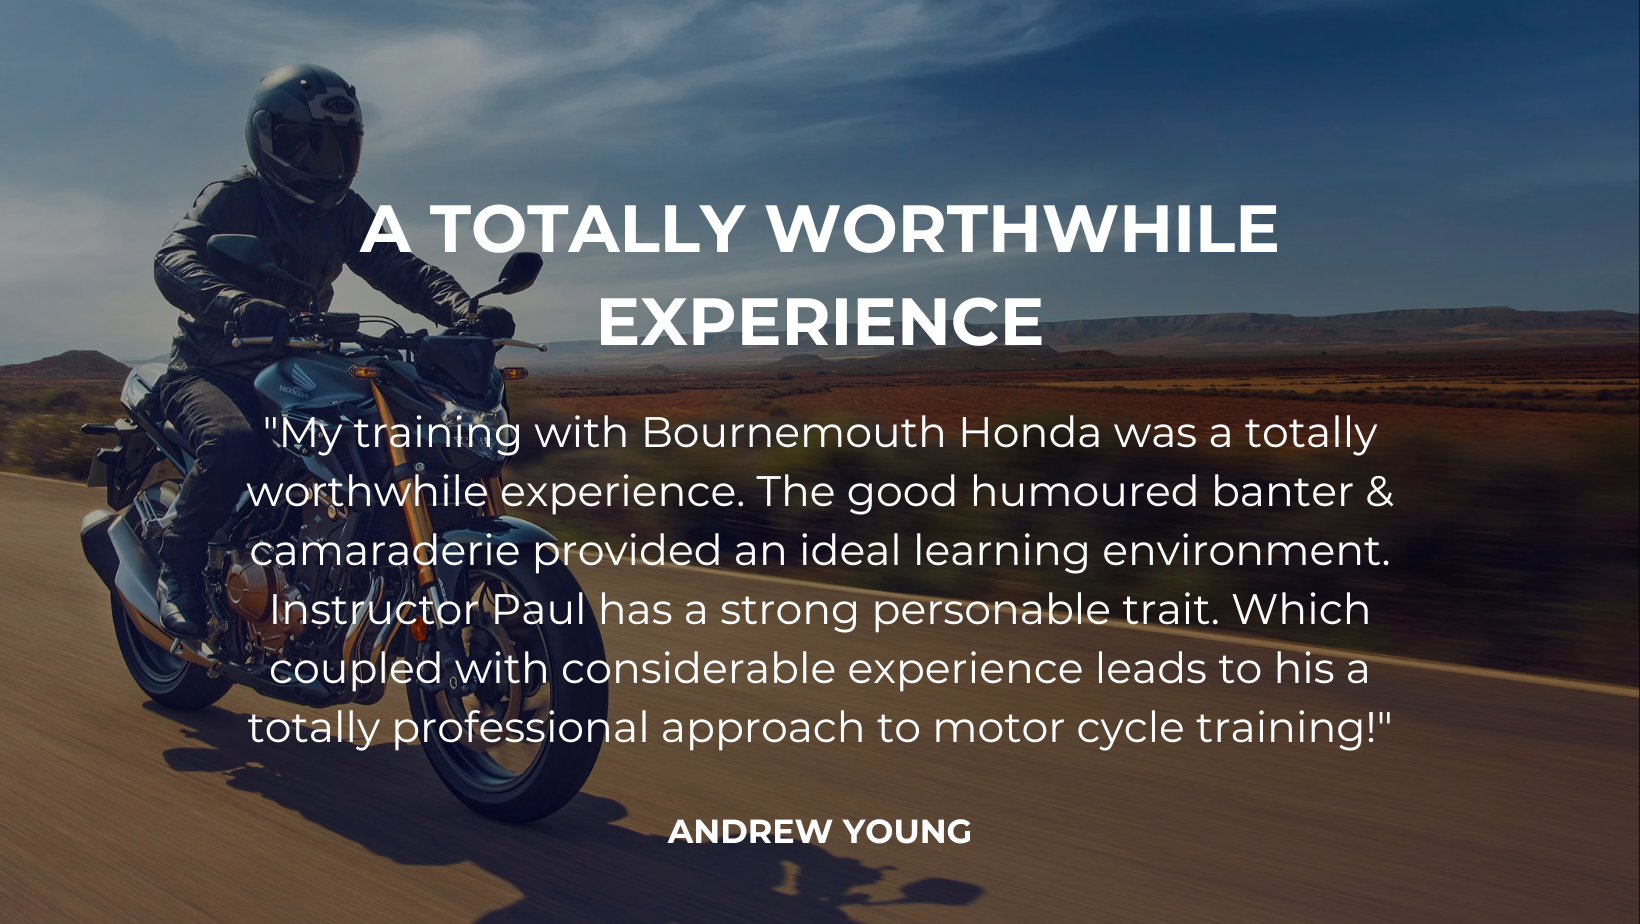 Motorcycle Training in Bournemouth, Motorcycle Training in Dorset, Book your CBT, Full License Motorbike License, Honda of Bournemouth 